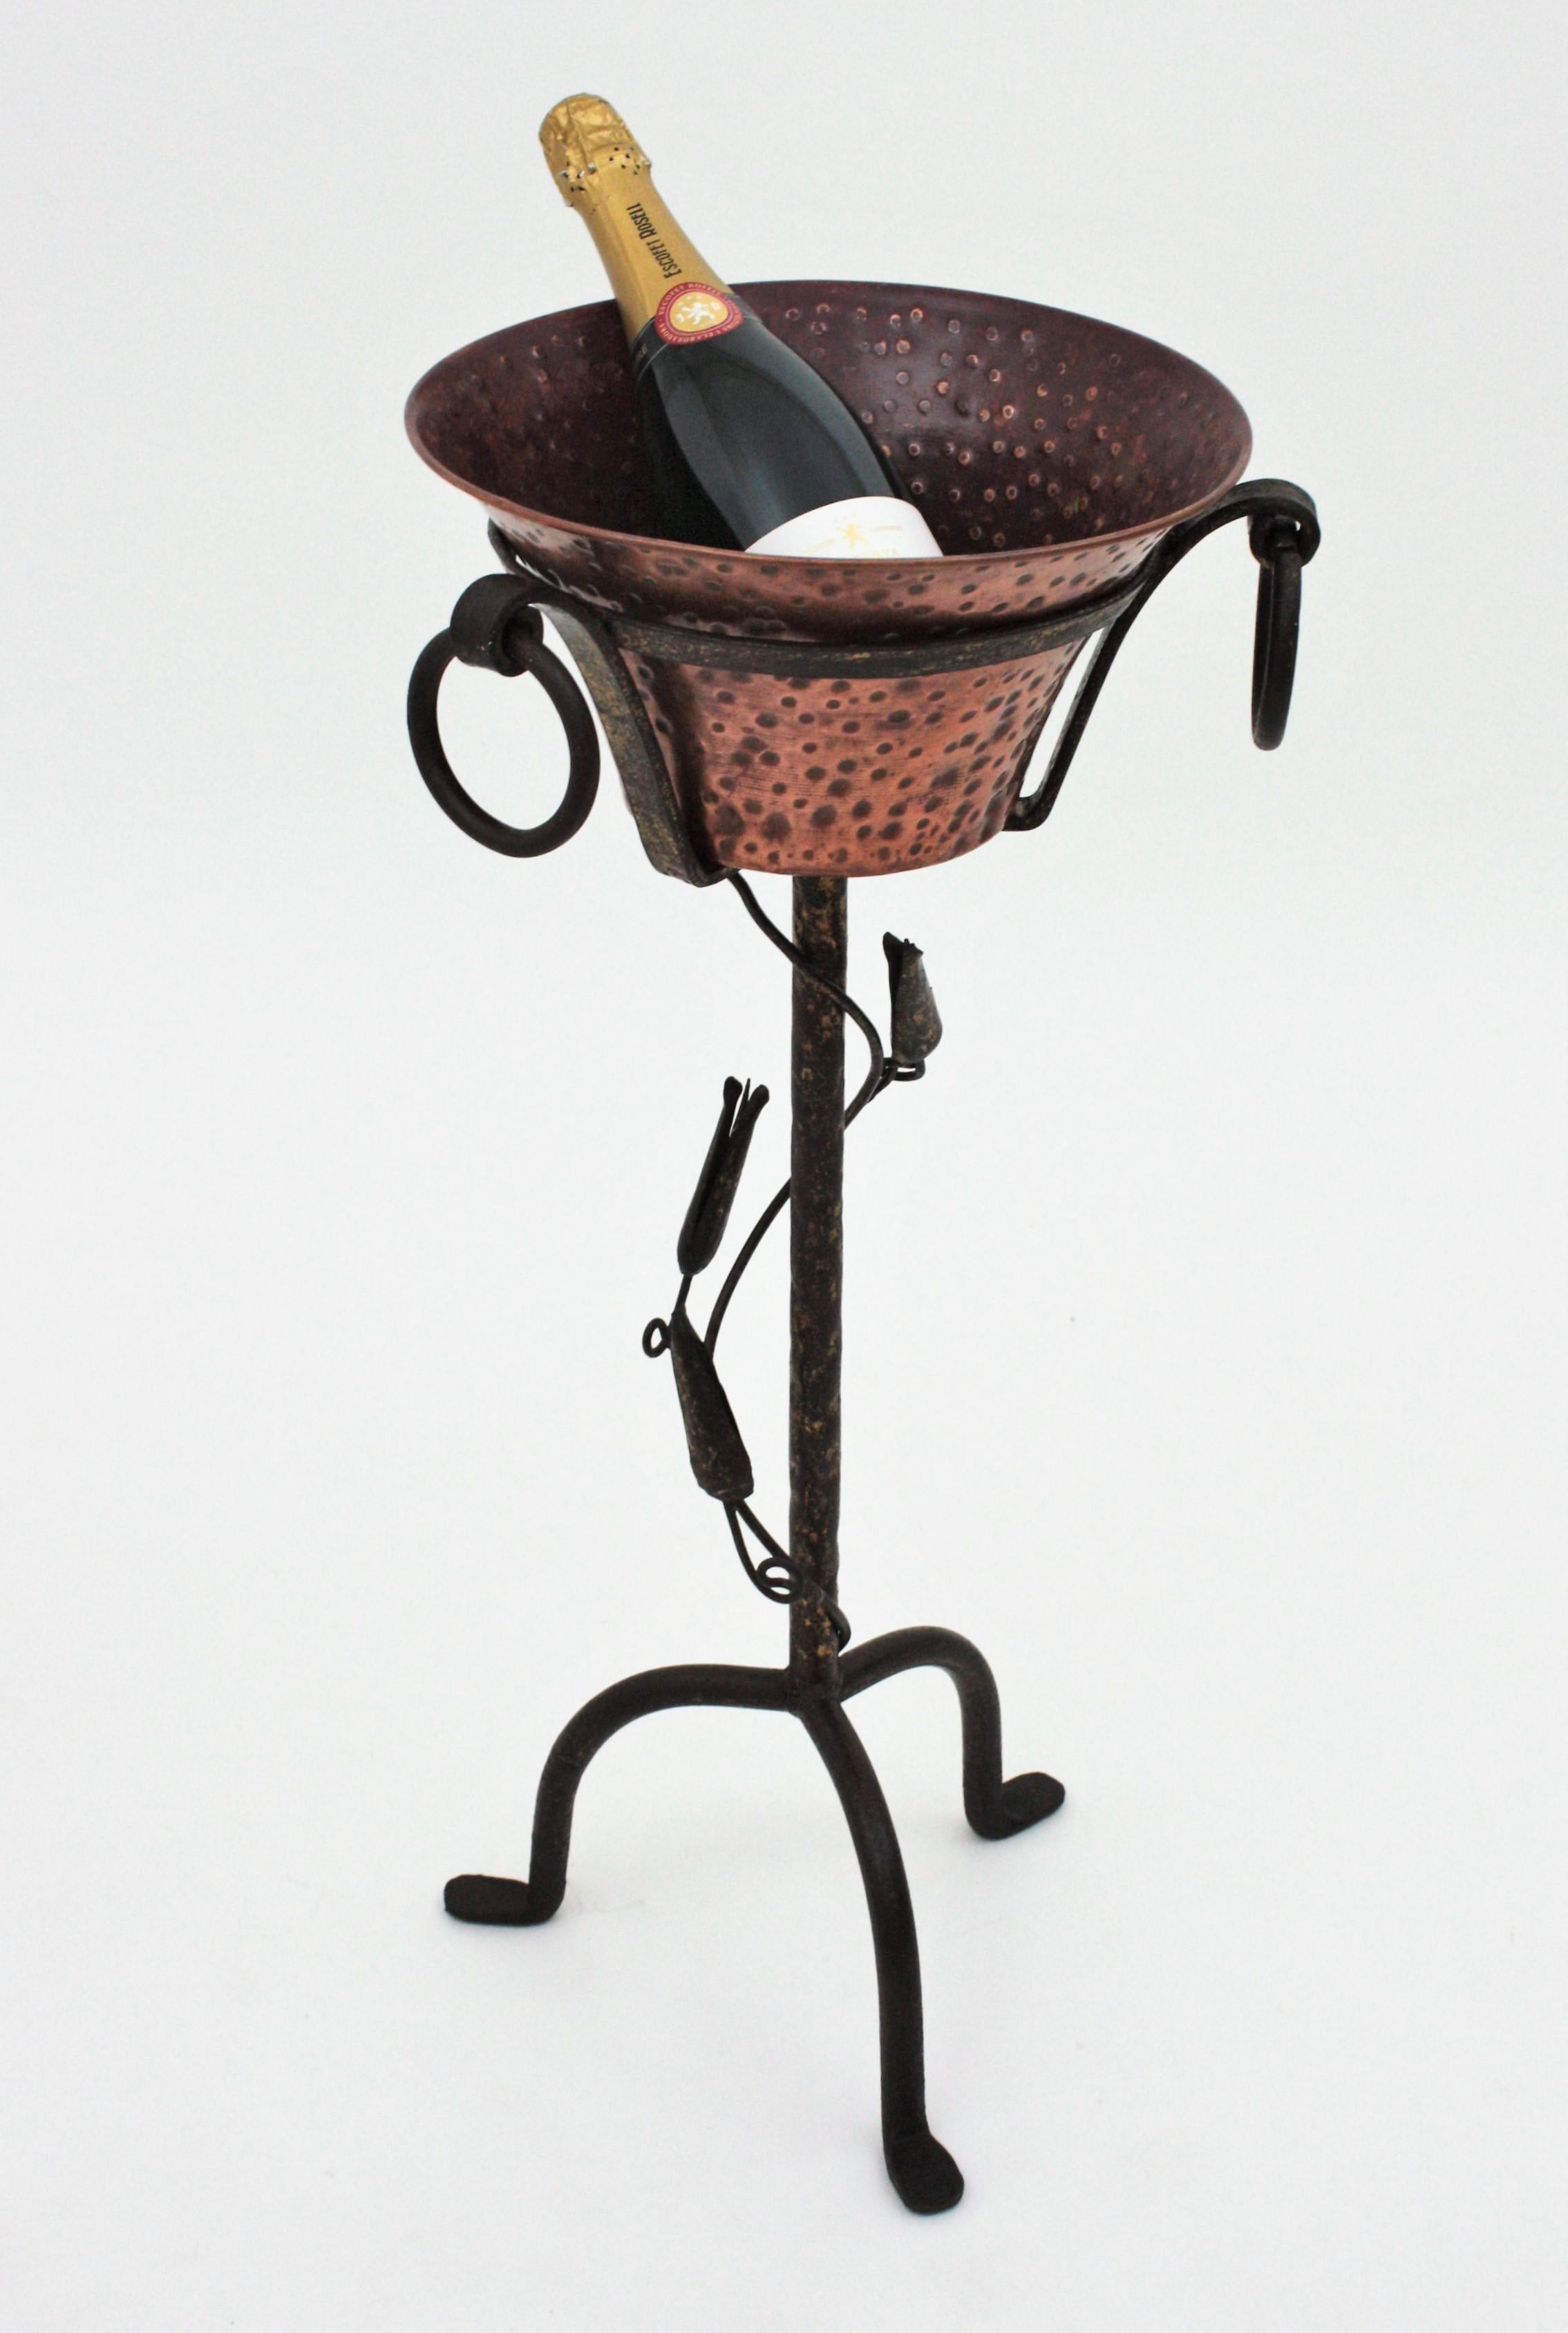 Wrought Iron Champagne or Wine Cooler Stand Serving Bucket in Hand Forged Iron and Copper